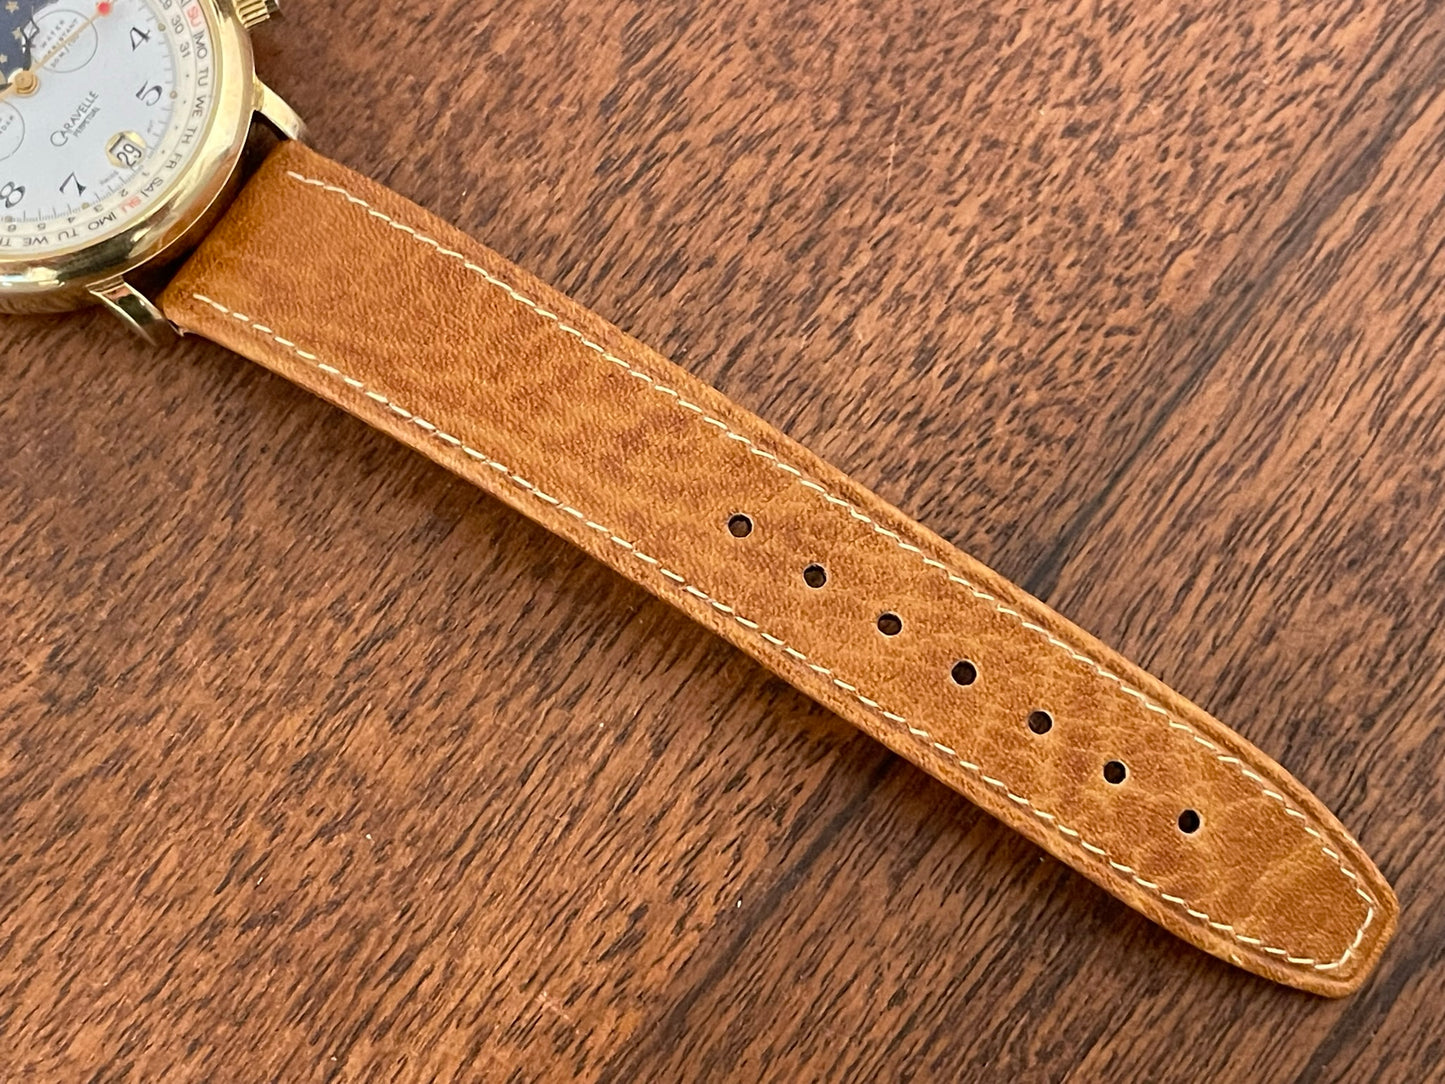 (1980s) Caravelle Perpetual dress watch (Serviced)